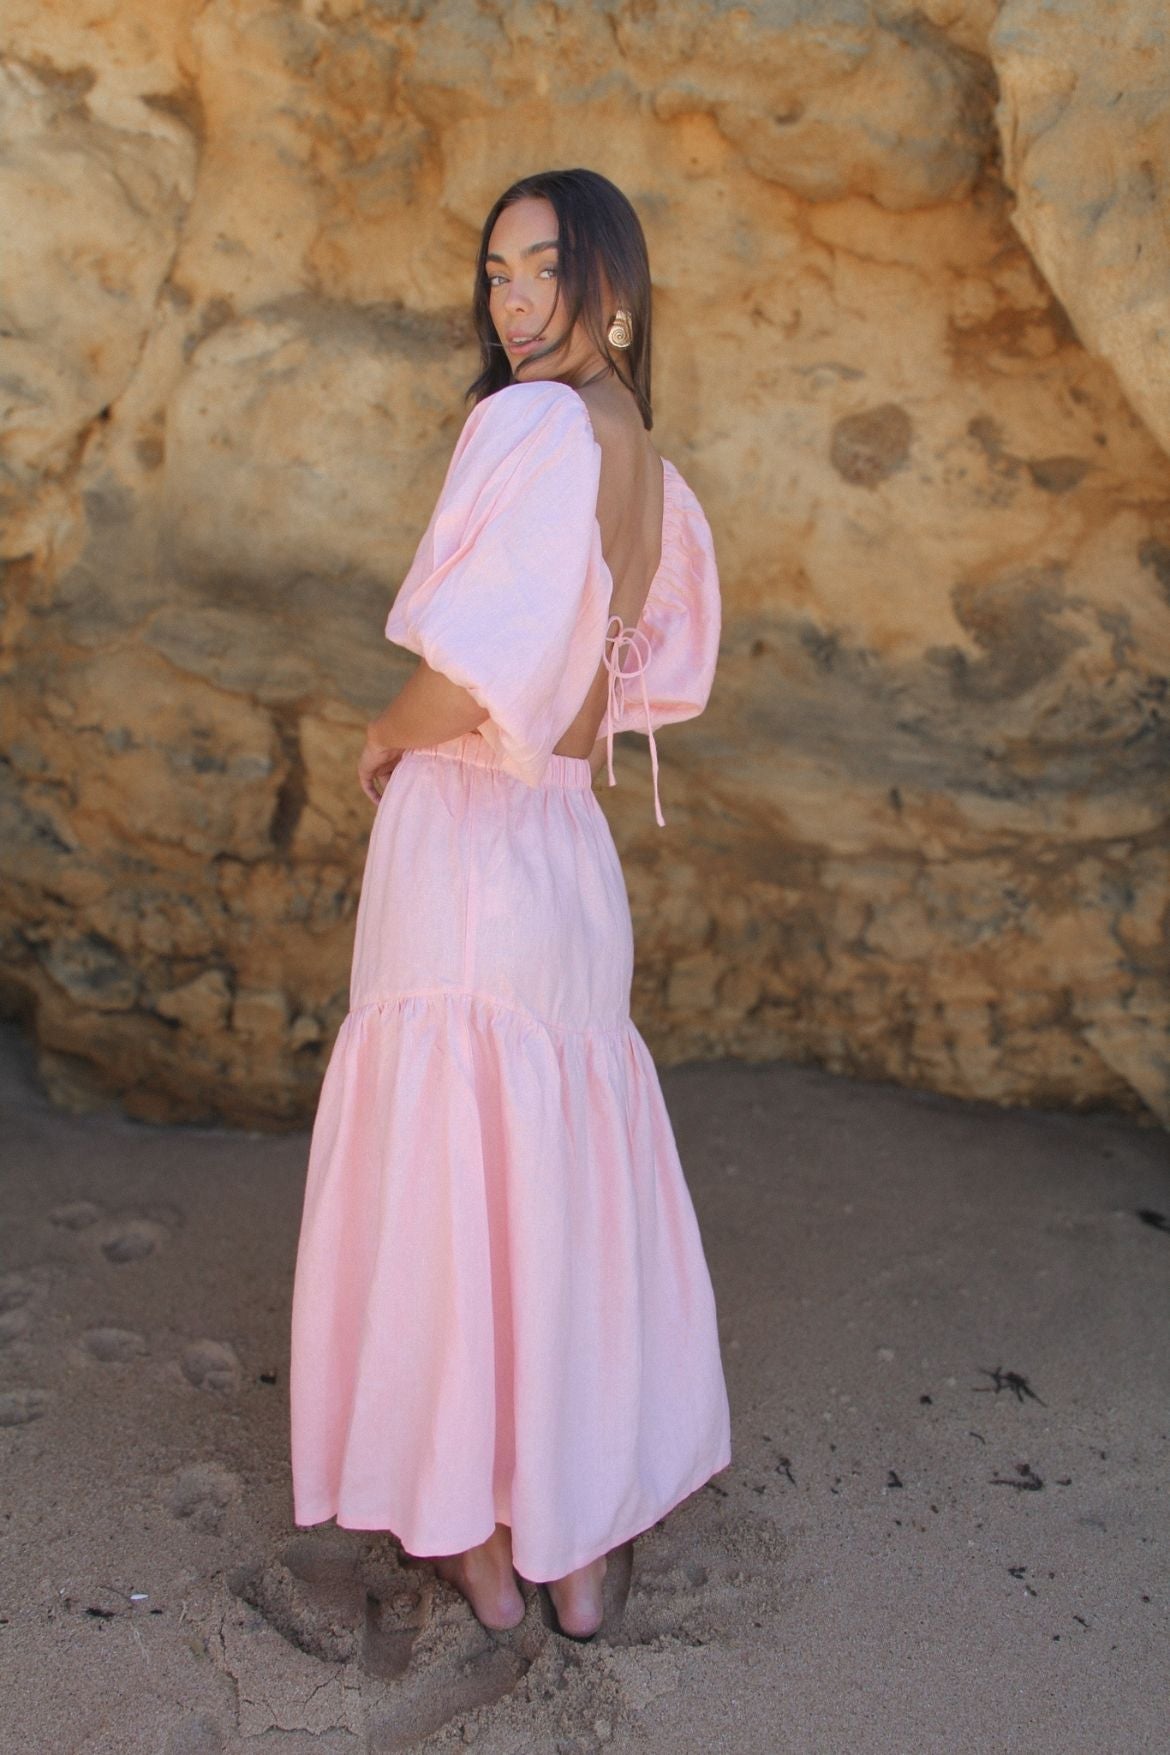 The Ease Zephyr skirt peony pink, linen tiered maxi skirt in soft pastel pink